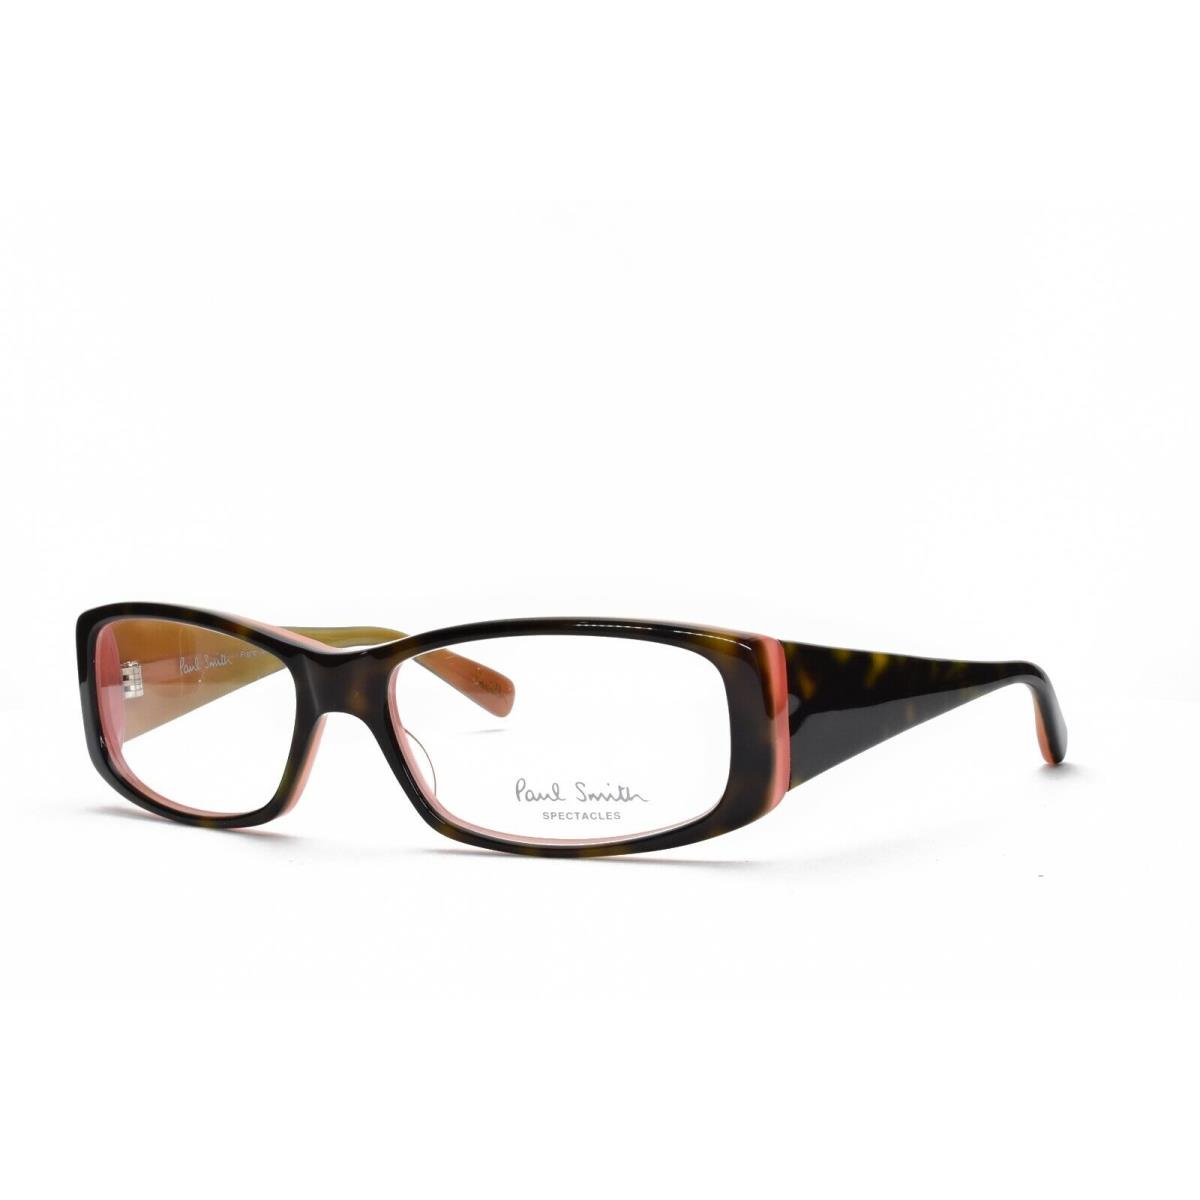 Paul Smith PS 416 Oabl Eyeglasses Frames Only 53-15-130